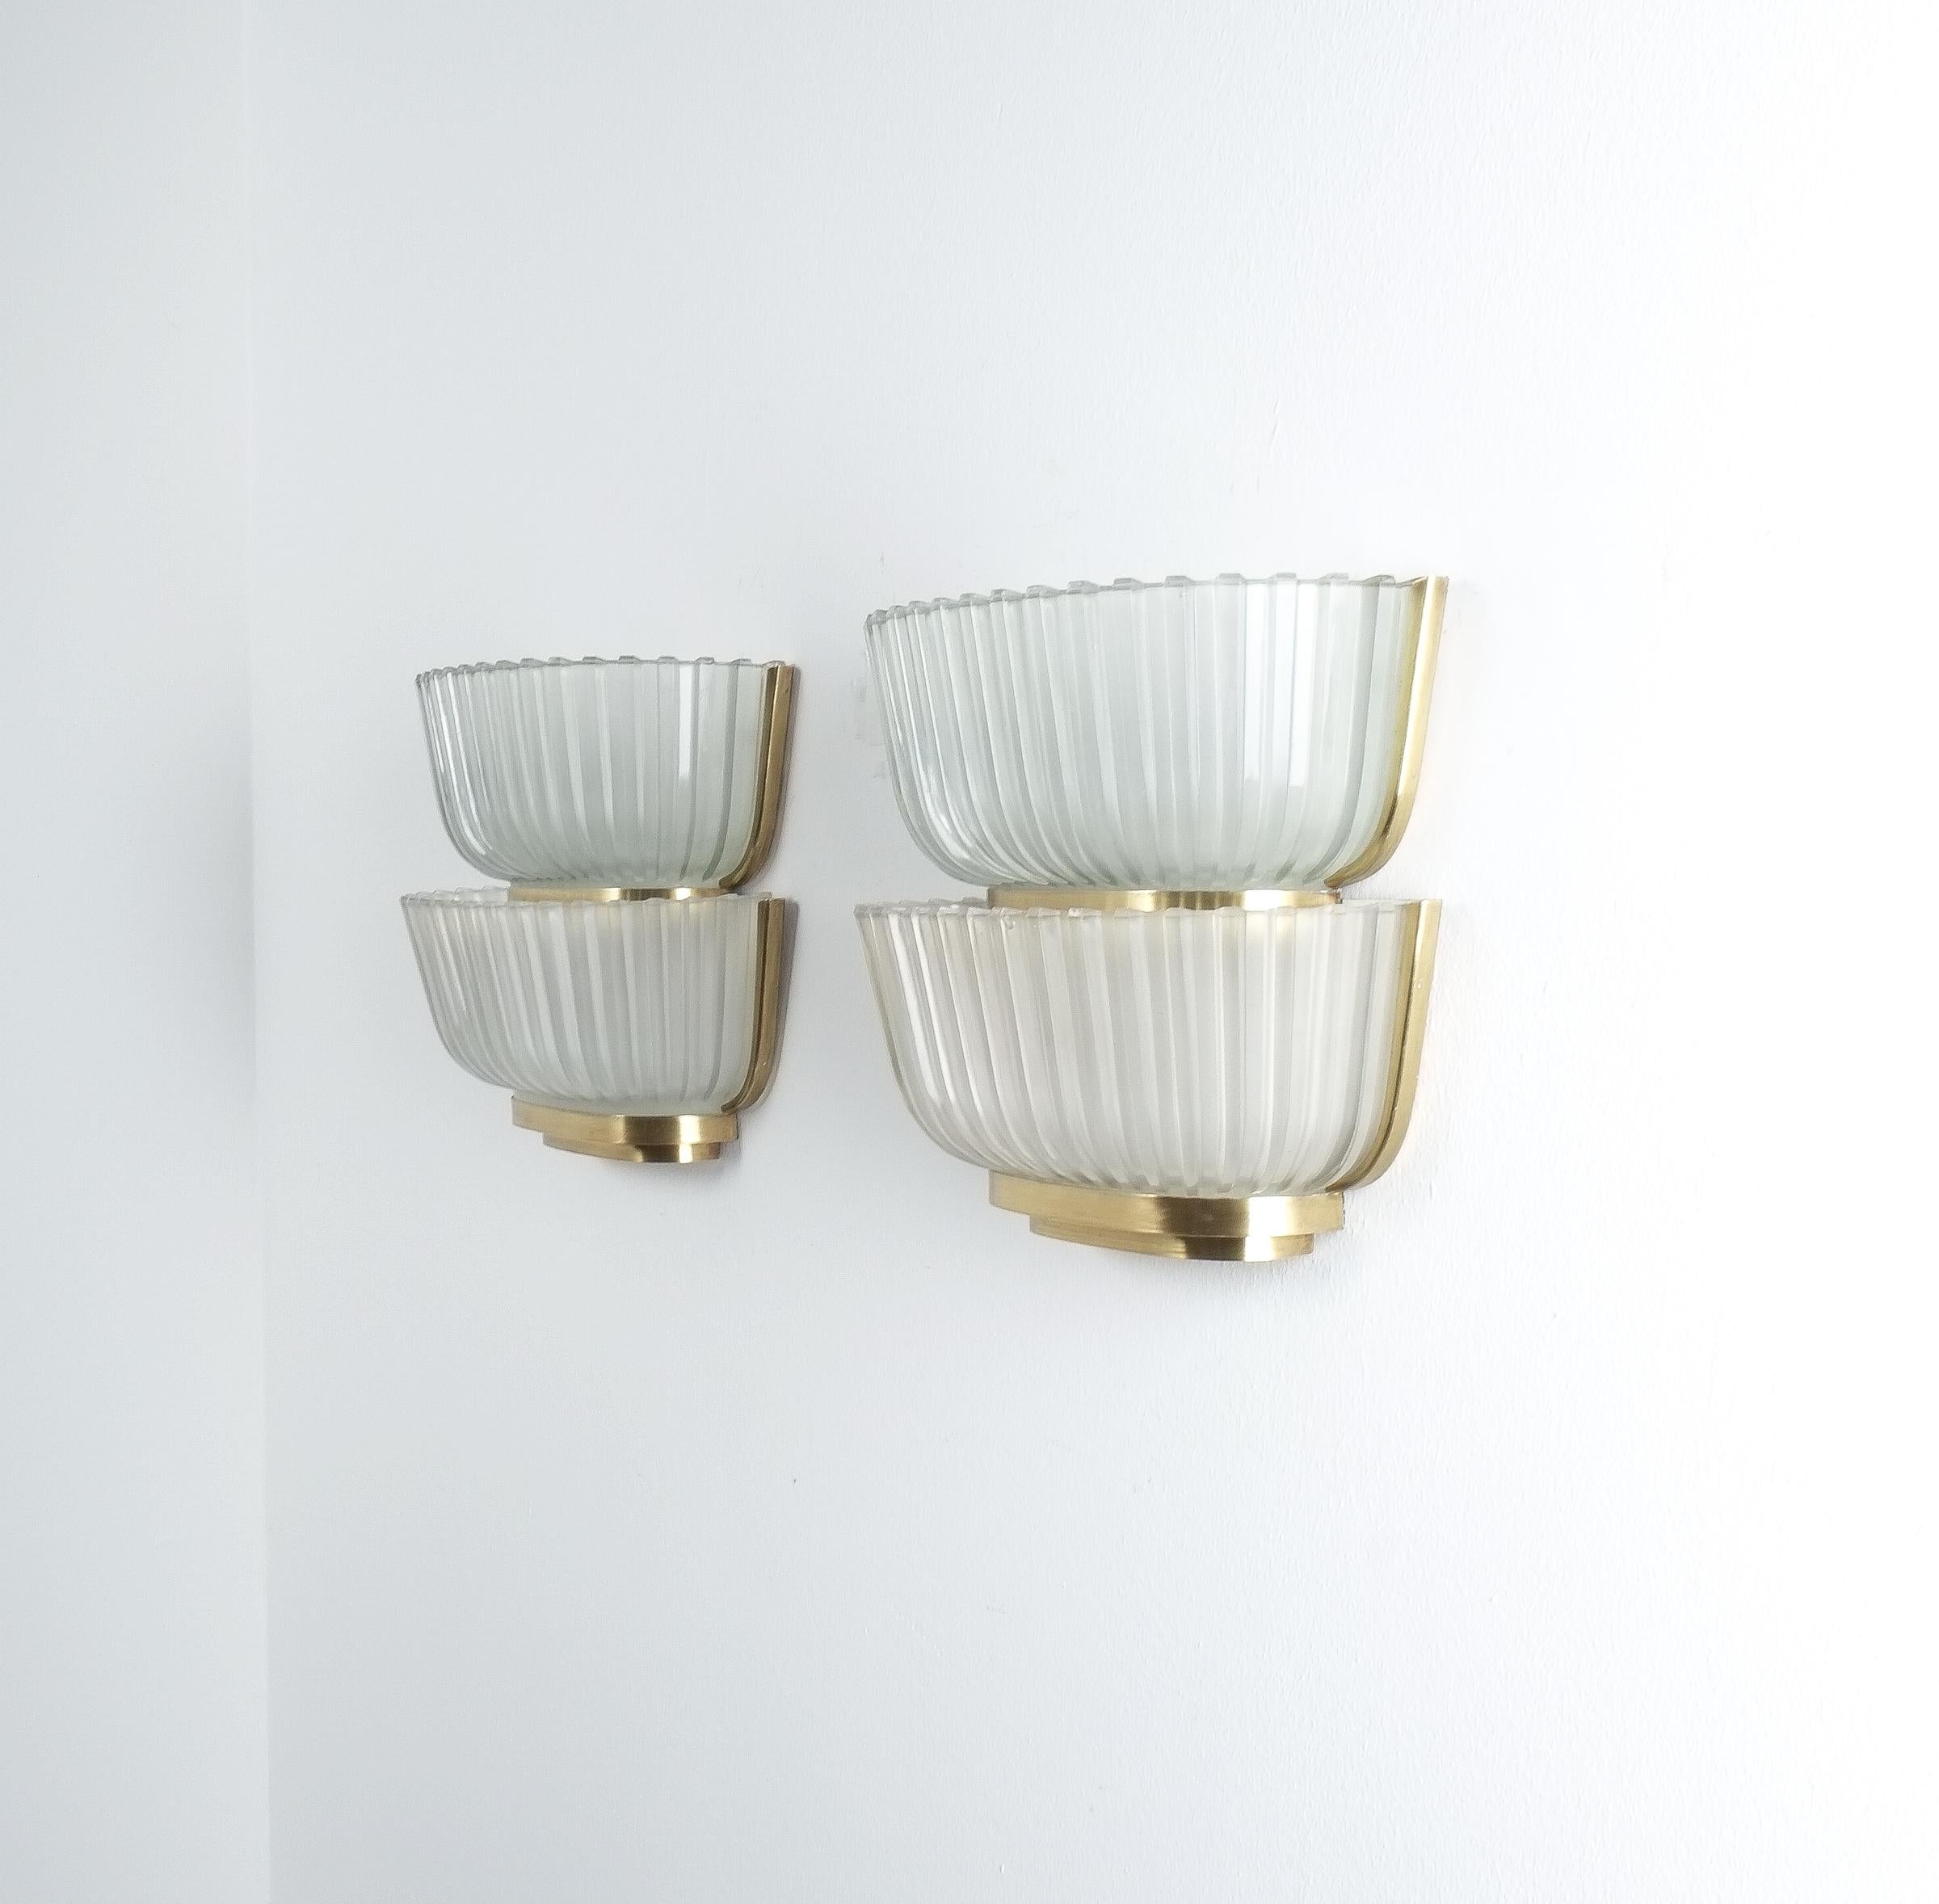 Pair of Late Art Deco Glass and Brass Sconces Refurbished, Italy, circa 1940 For Sale 1